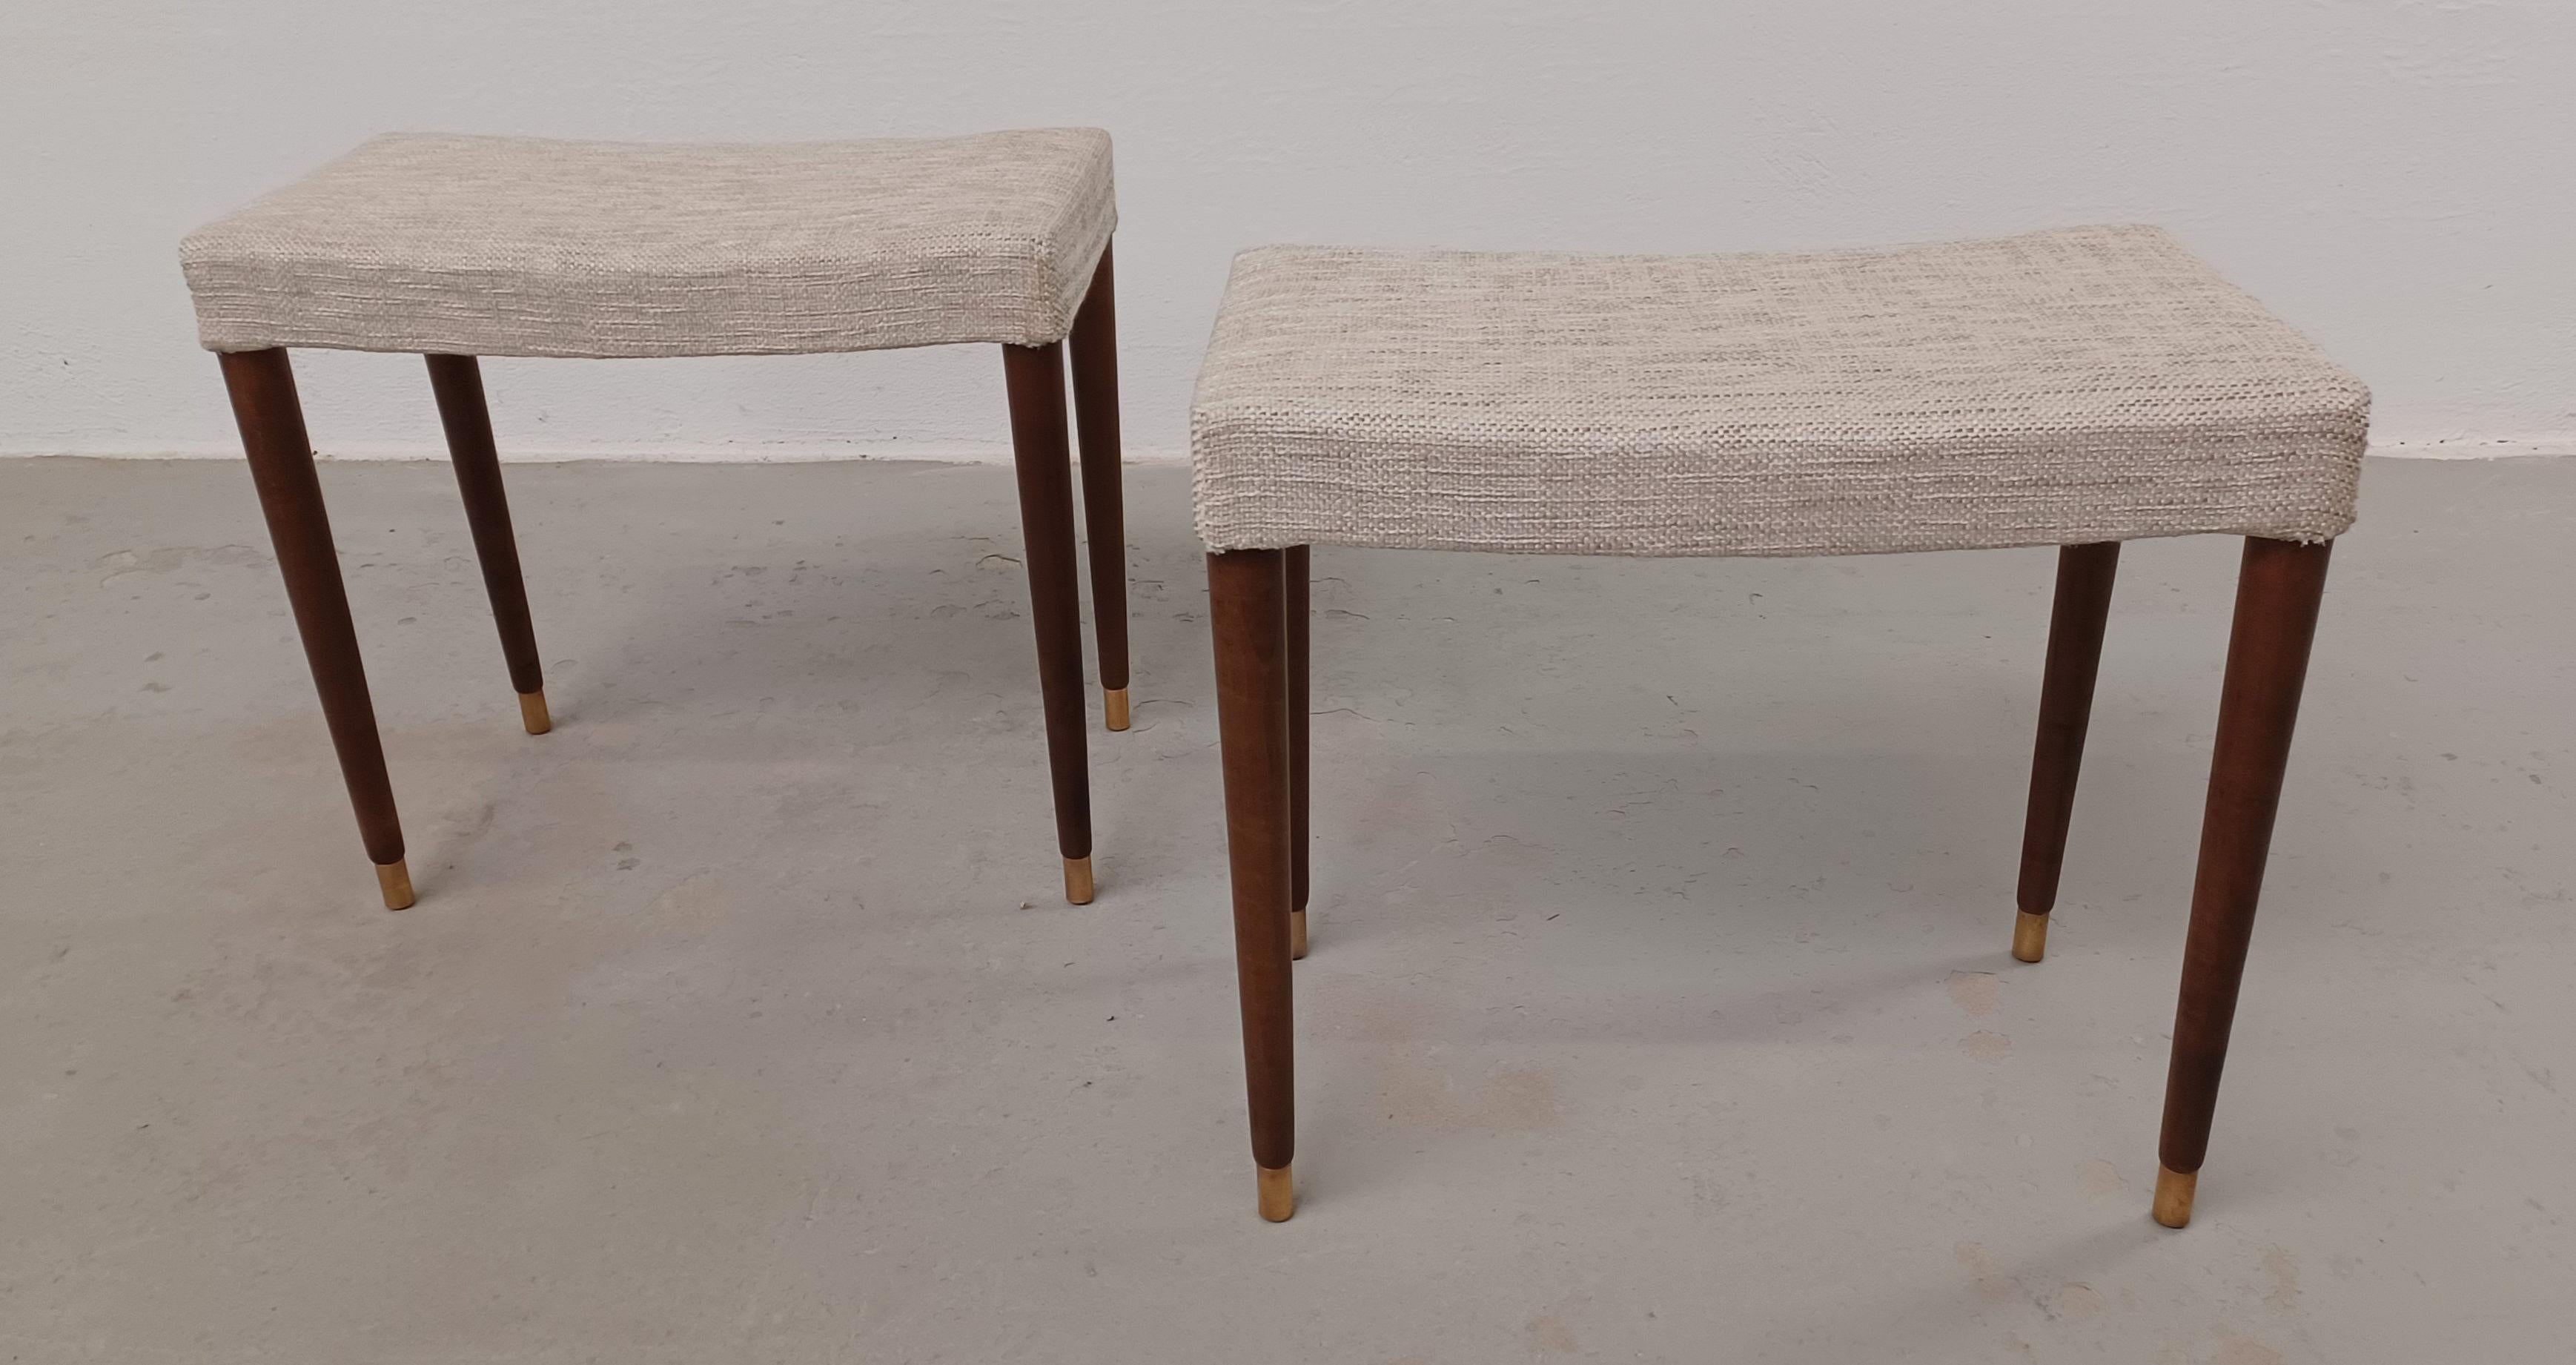 1950's set of two restored and reupholstered Danish mid-century modern stools

Set of two stools from the 1950s with tanned beech legs, solid brass shoes and new upholstery in very good condirion on a slightly curved seat.

Our cabinetmaker has